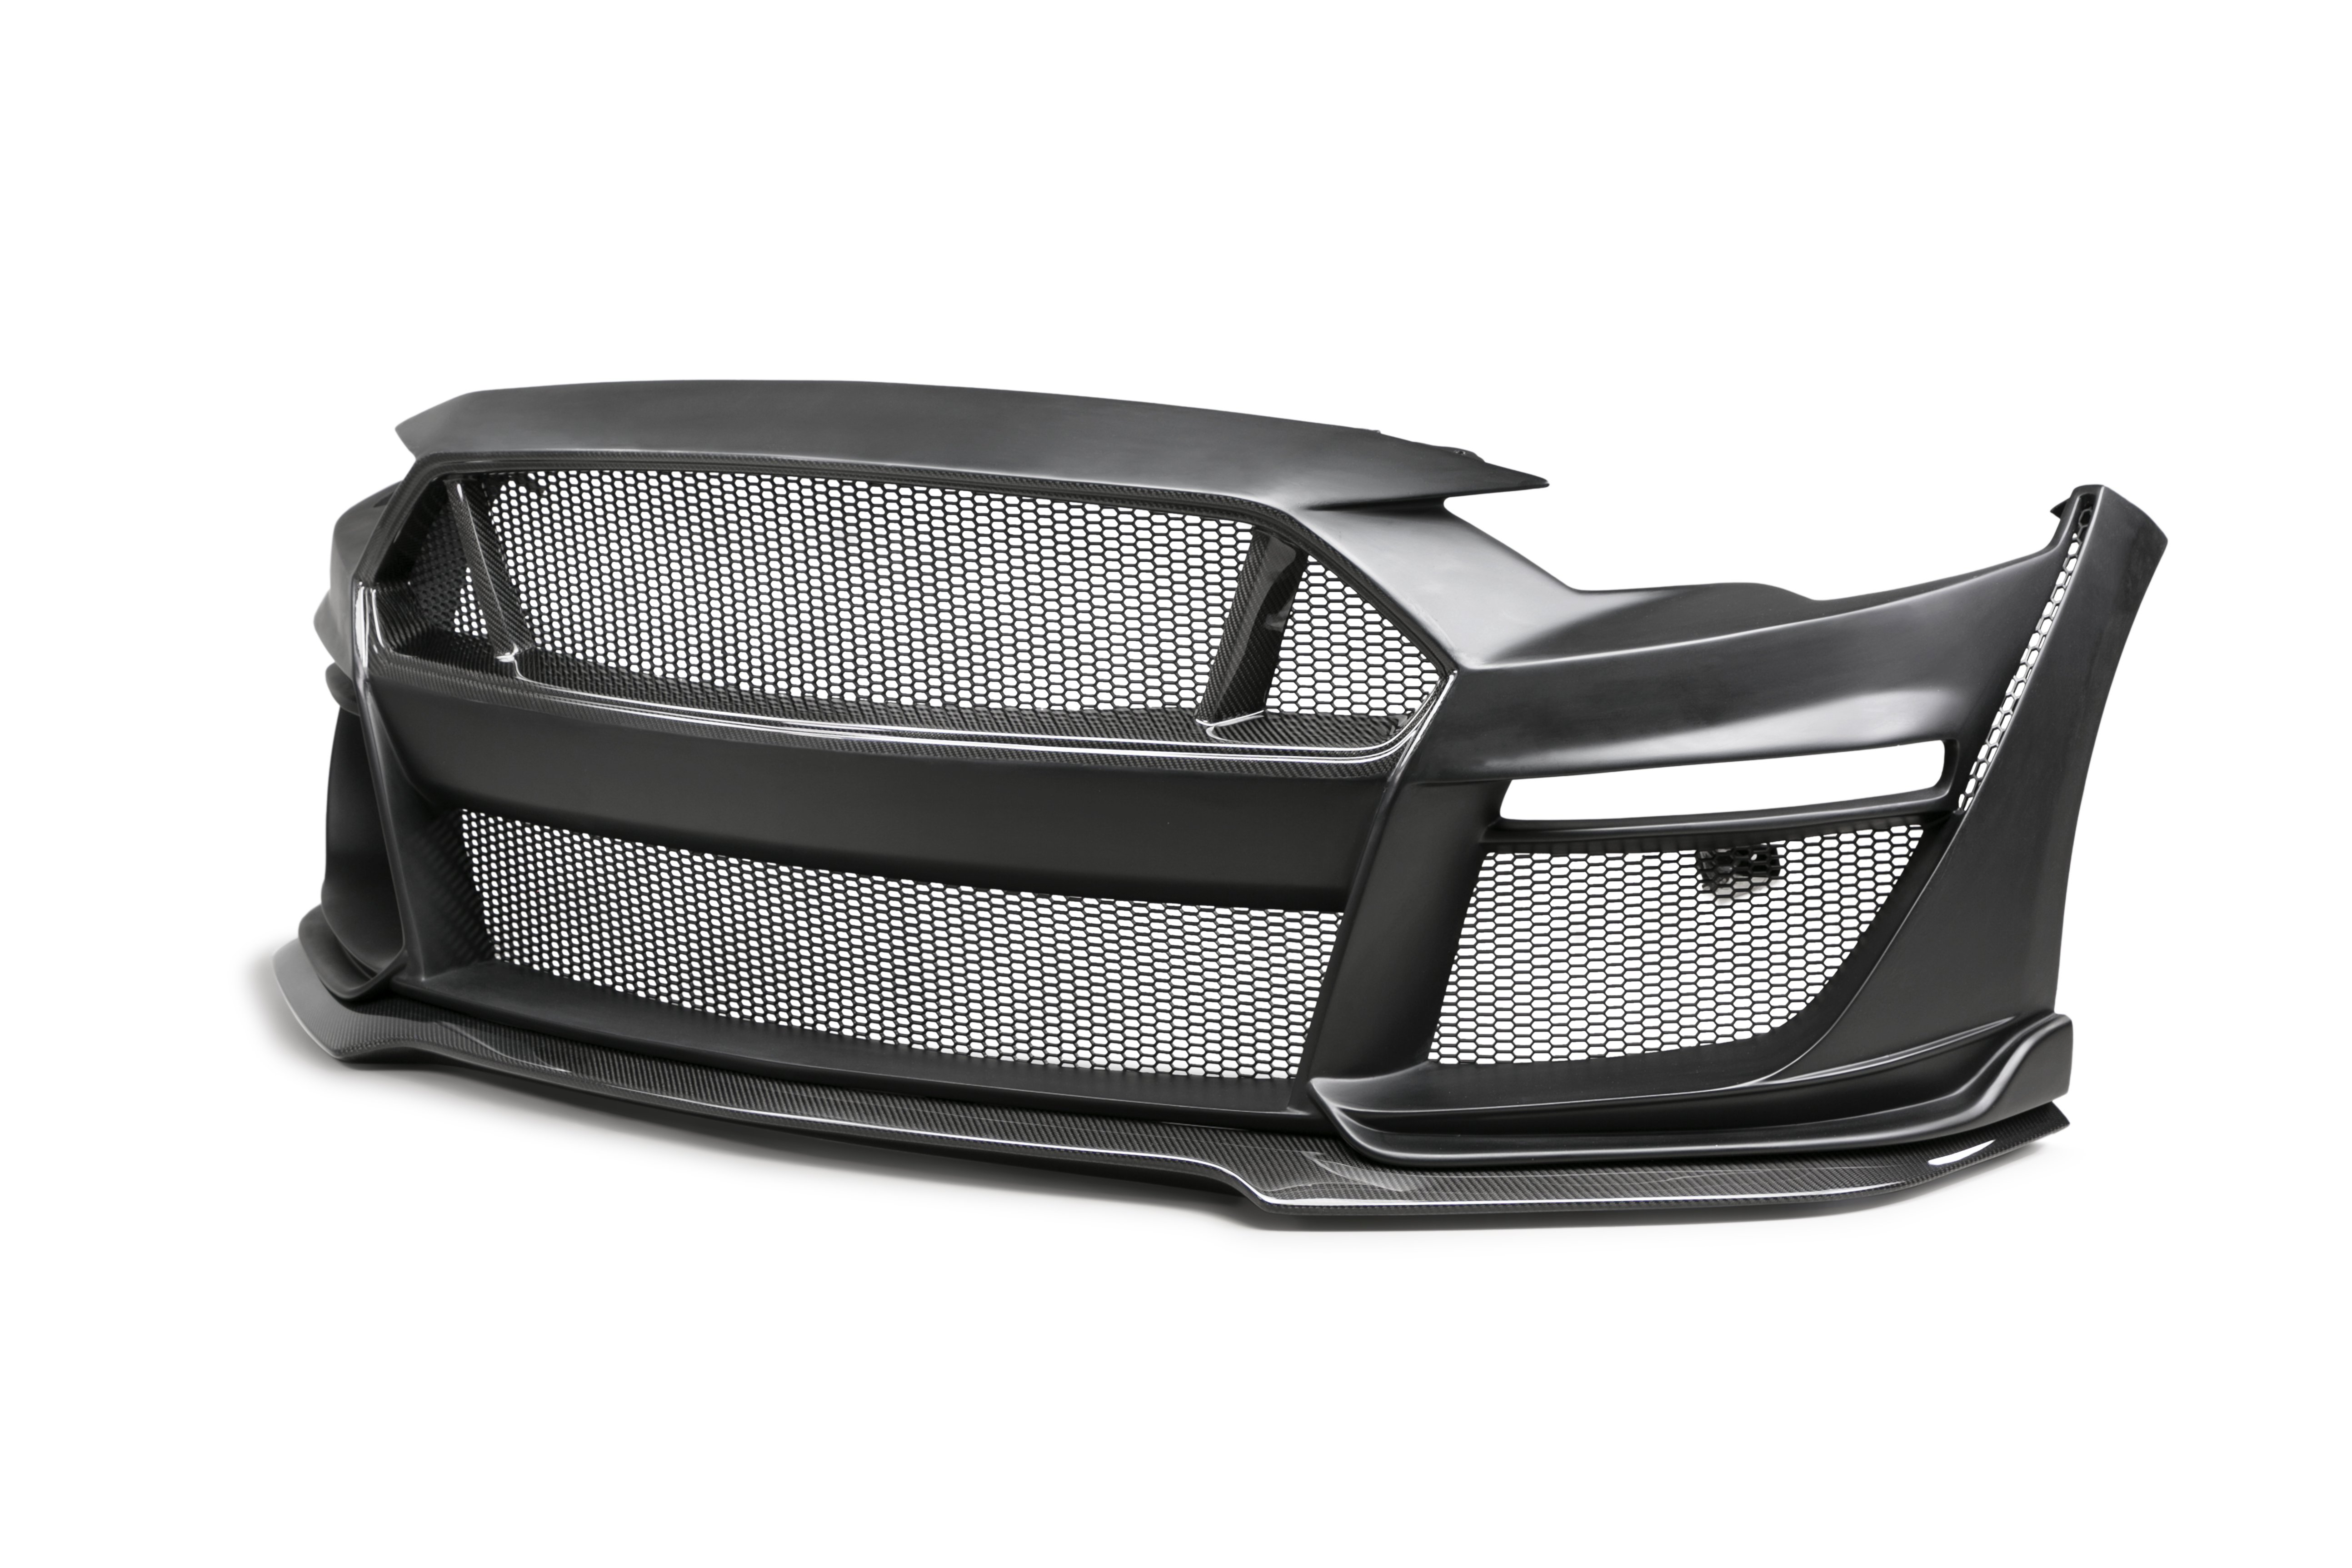 Type-ST partial carbon front bumper for 2018-2020 Ford Mustang (only work with Type-ST fenders)